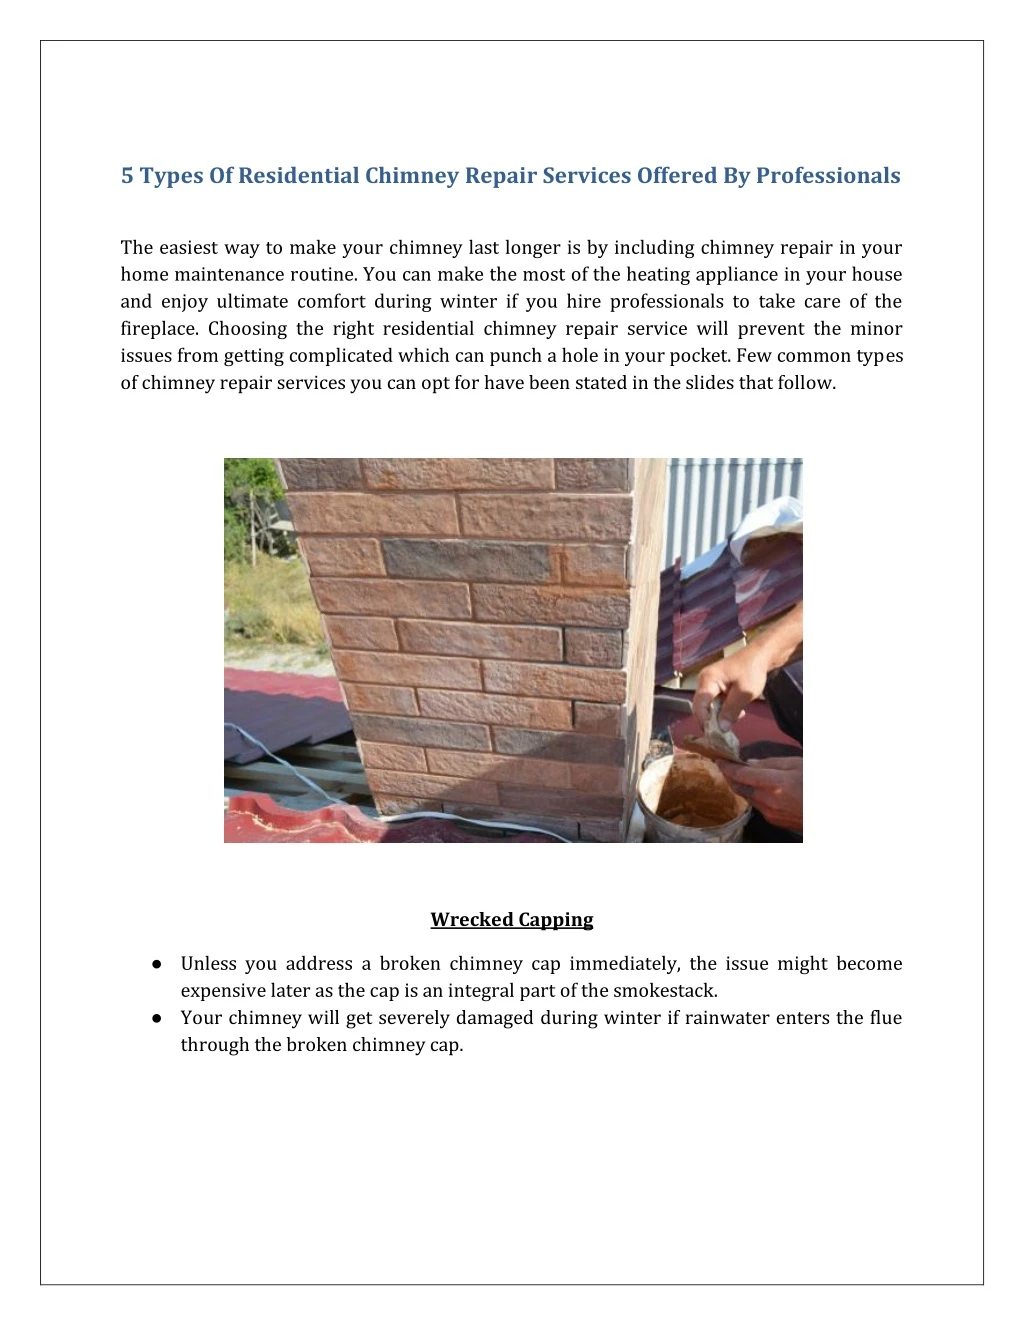 5 types of residential chimney repair services